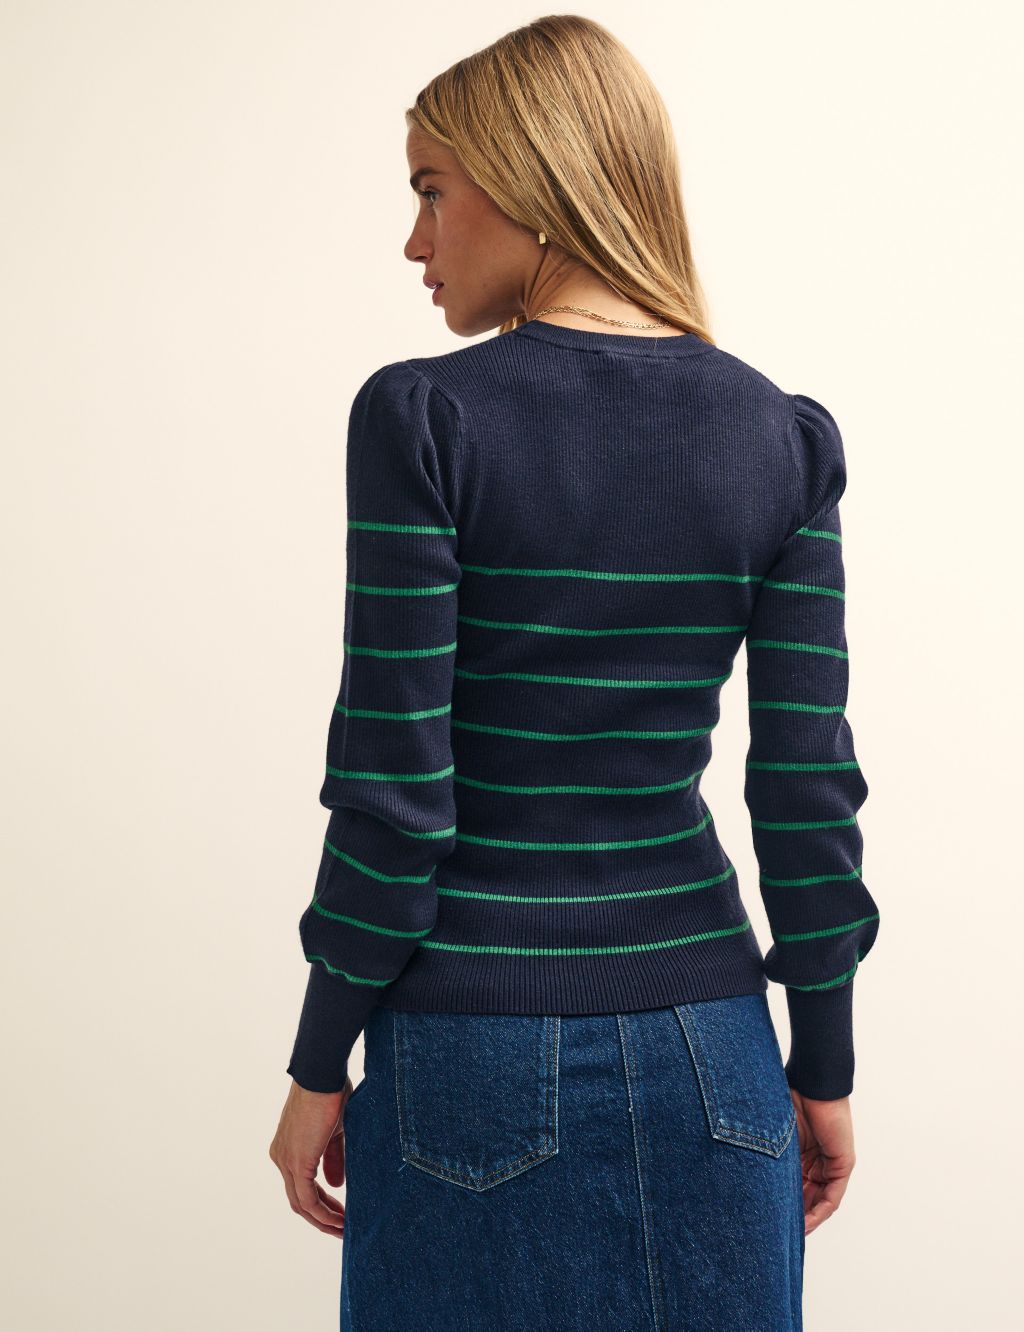 Striped Ribbed Crew Neck Knitted Top image 3